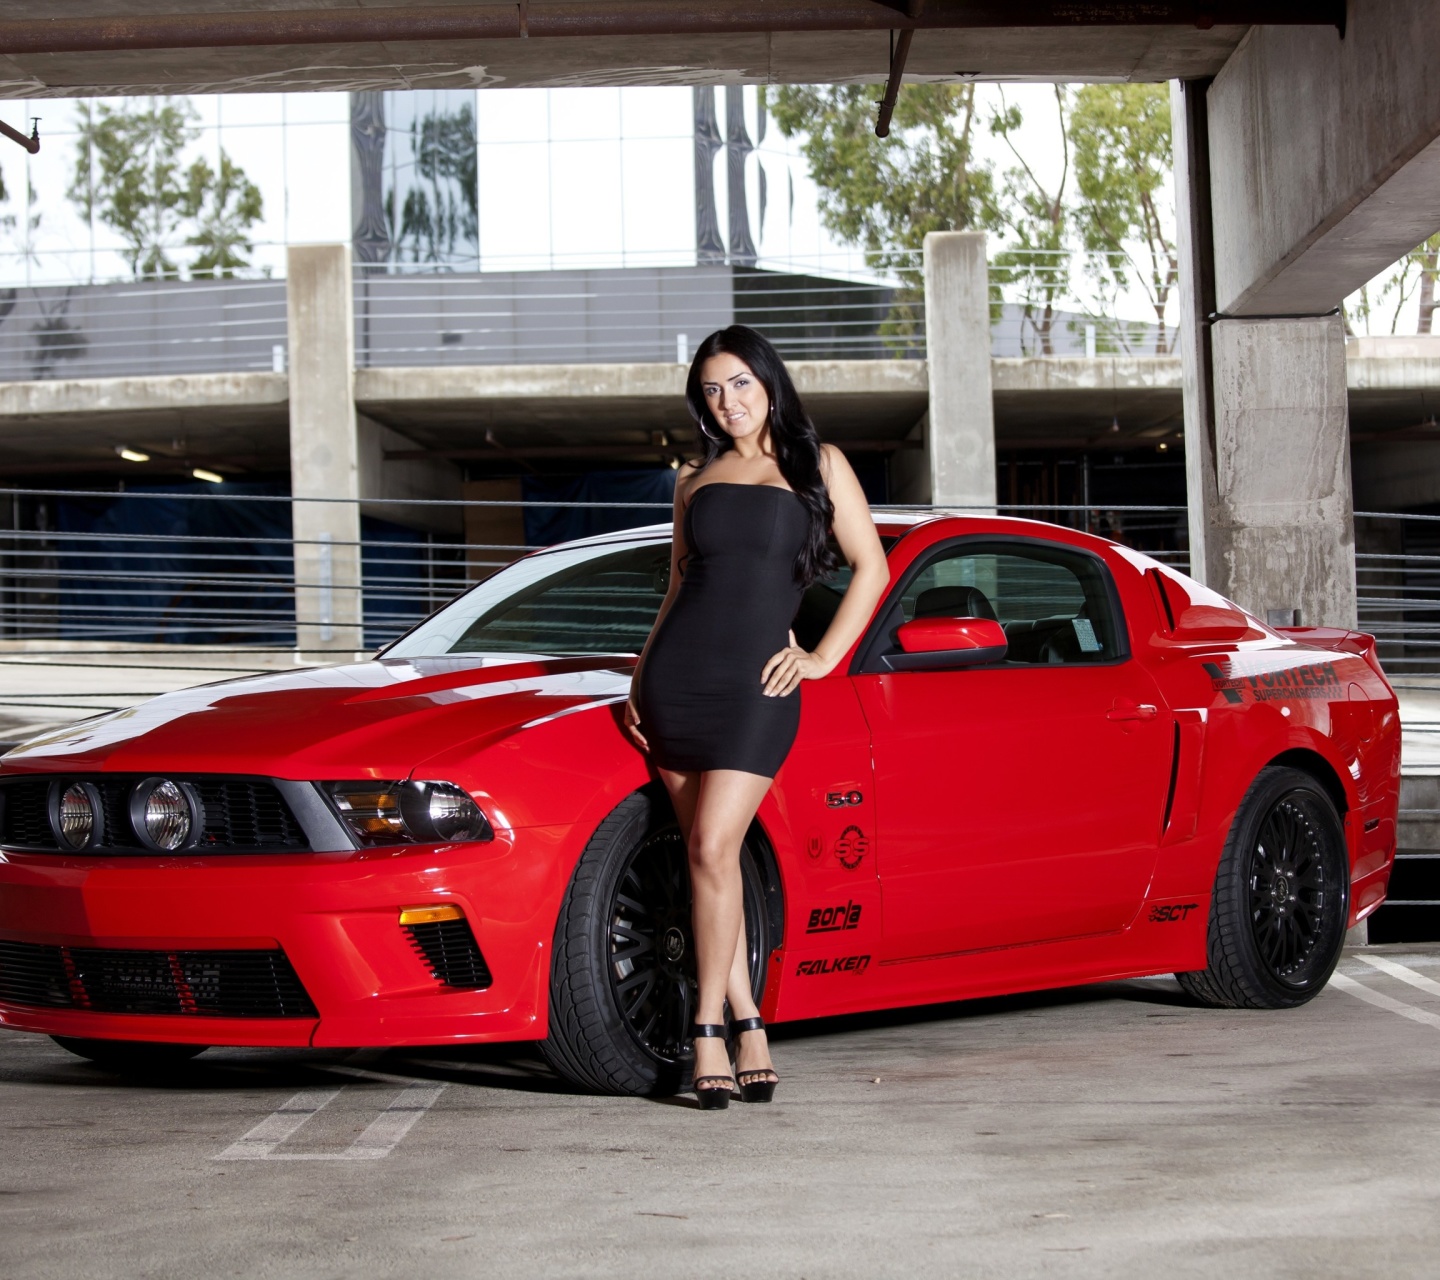 Ford Mustang GT Vortech with Brunette Girl wallpaper 1440x1280